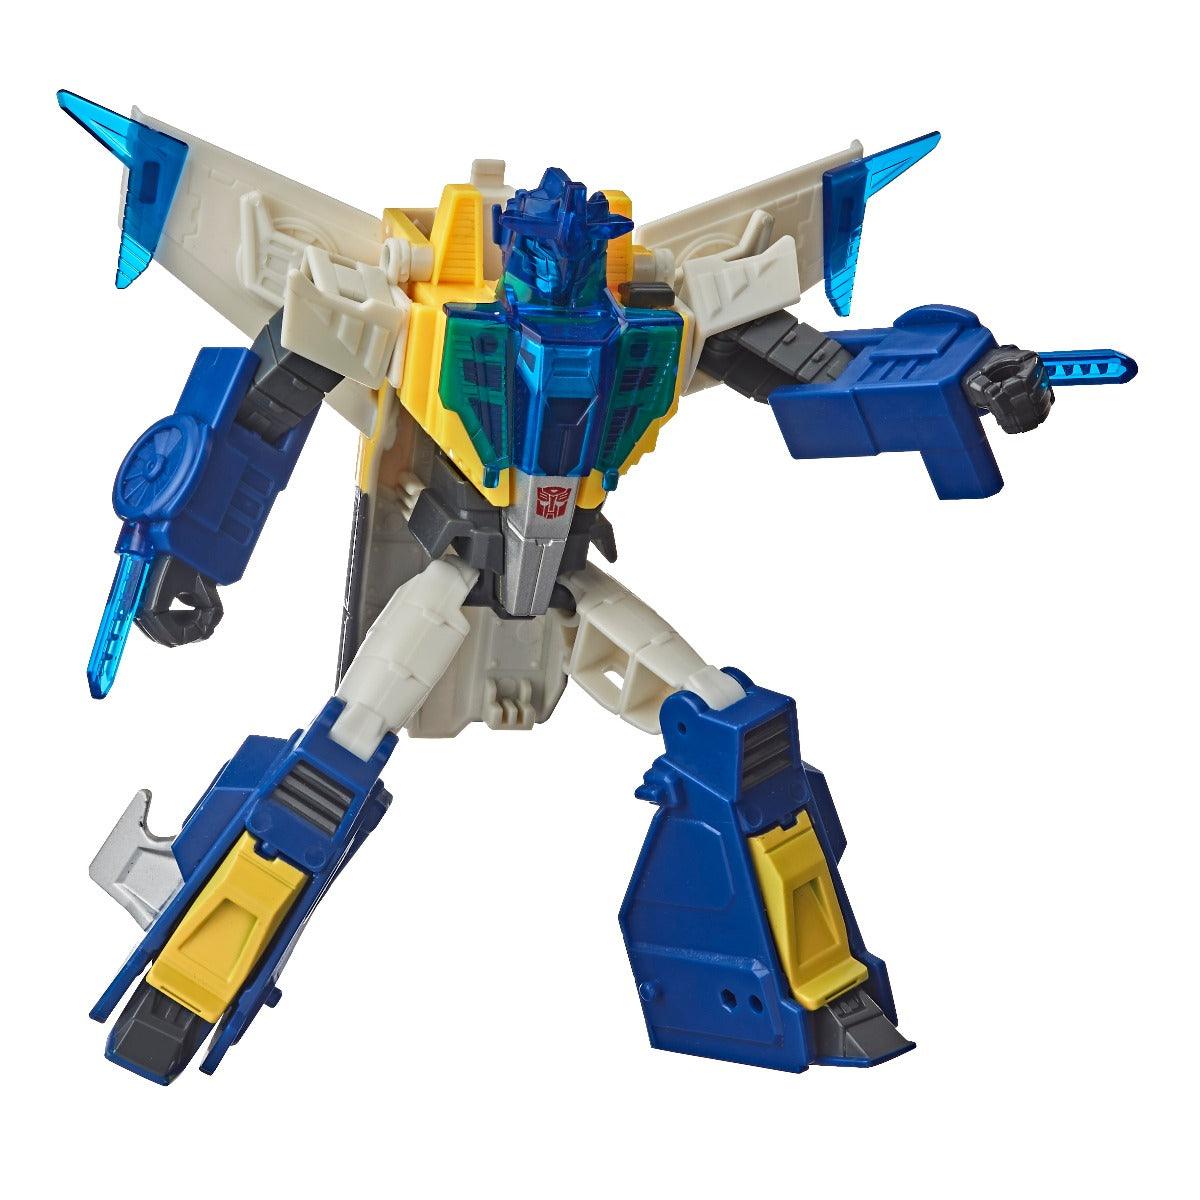 Transformers Meteorfire Cyberverse Adventures Battle Call Trooper Class Meteorfire, Voice Activated Energon Power Lights, Ages 6 and Up, 5.5-inch